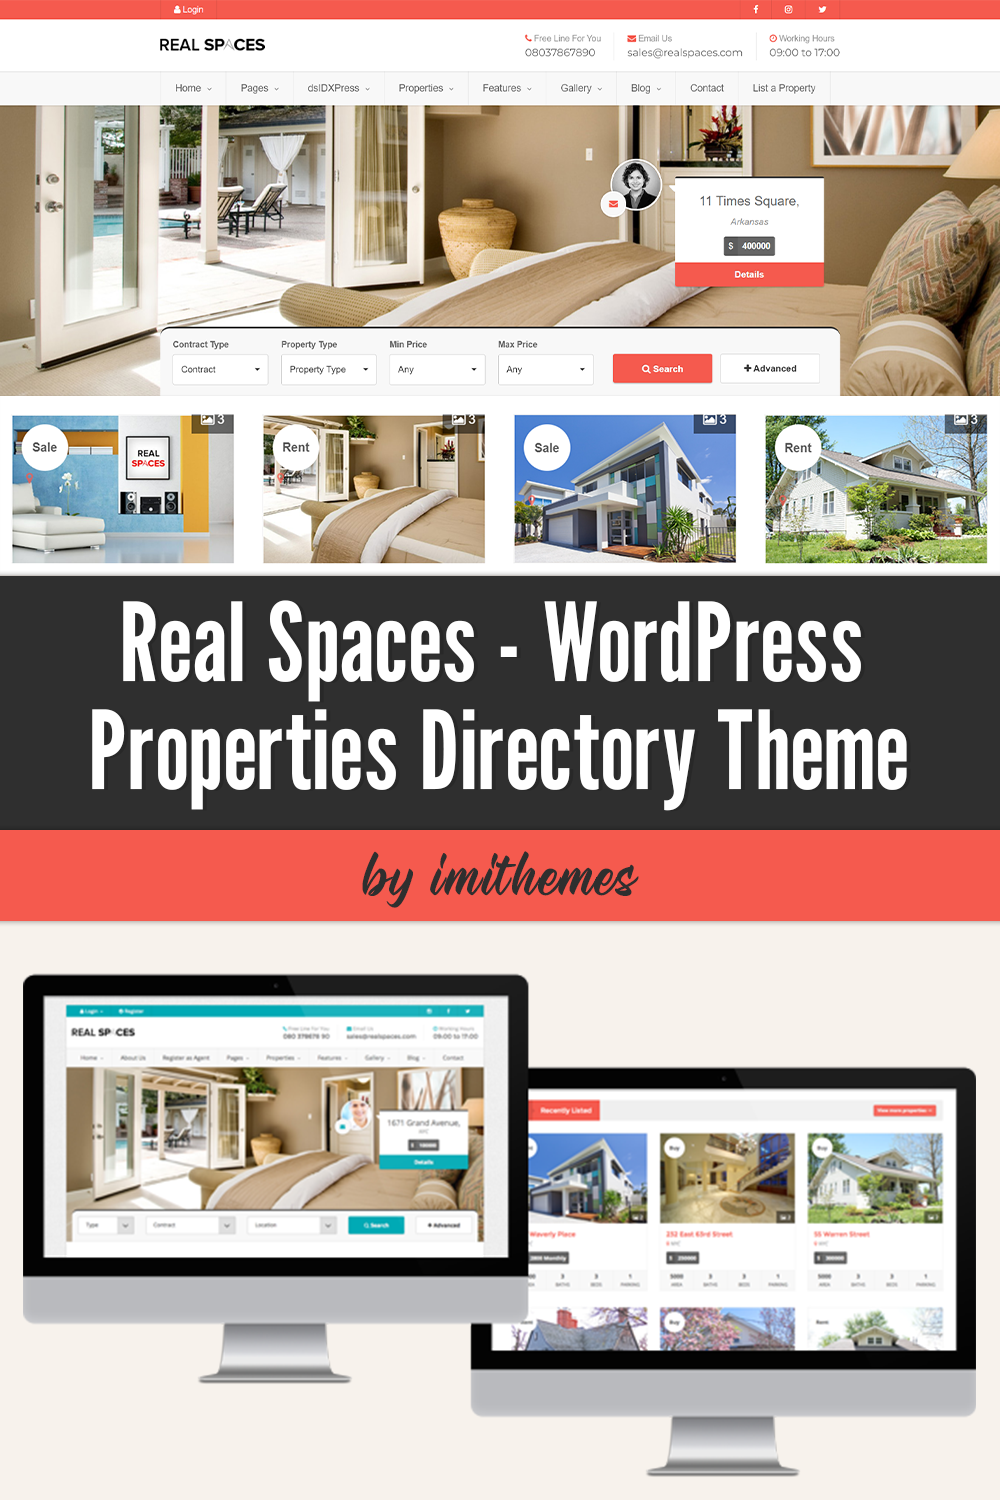 Illustrations real spaces wordpress properties directory theme of pinterest.